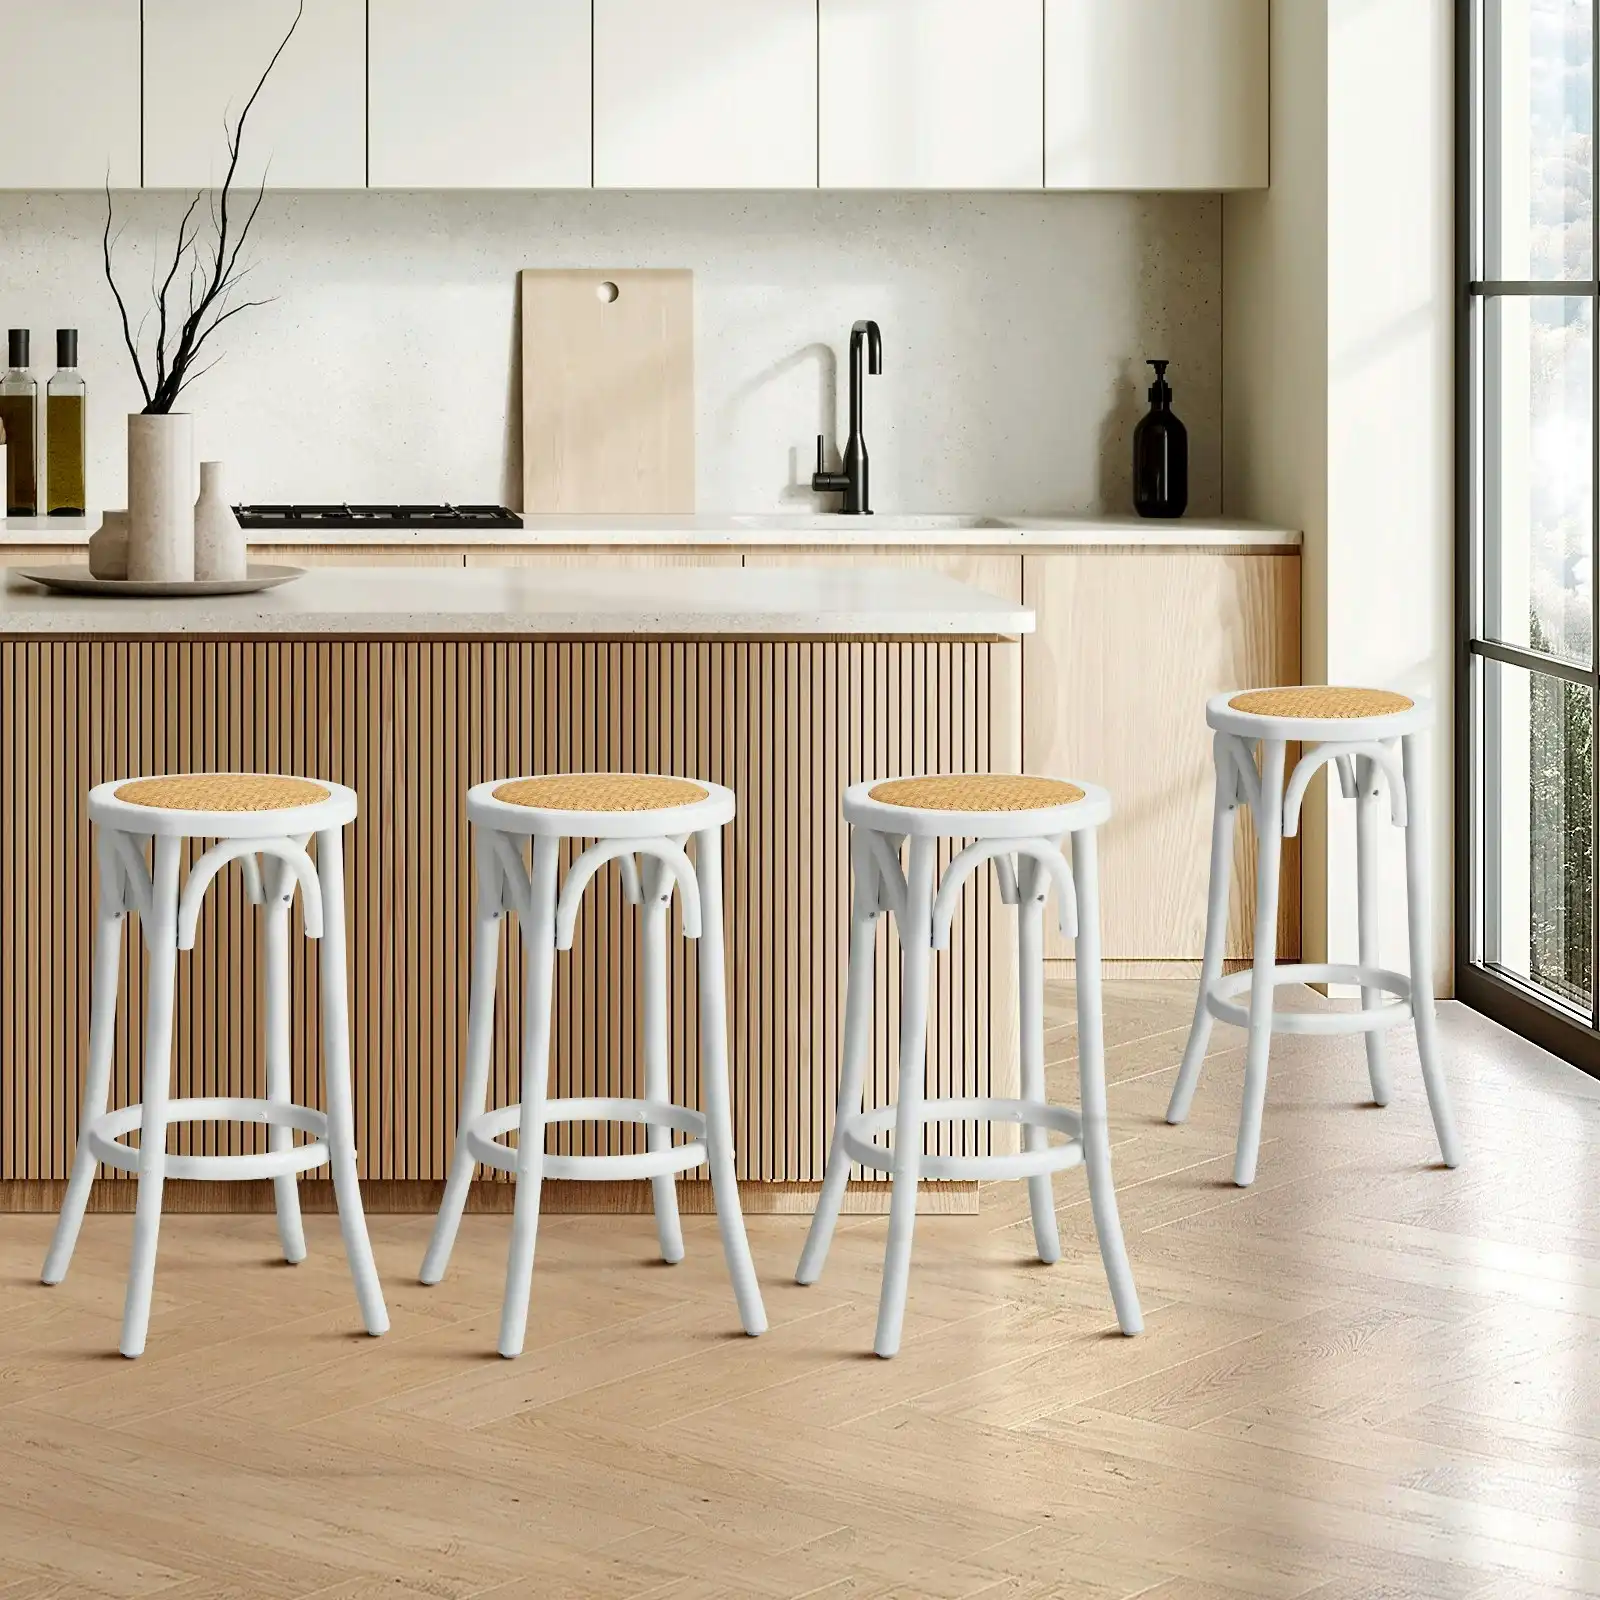 Oikiture Set of 4 Bar Stools Kitchen Vintage Dining Chair Rattan Seat White